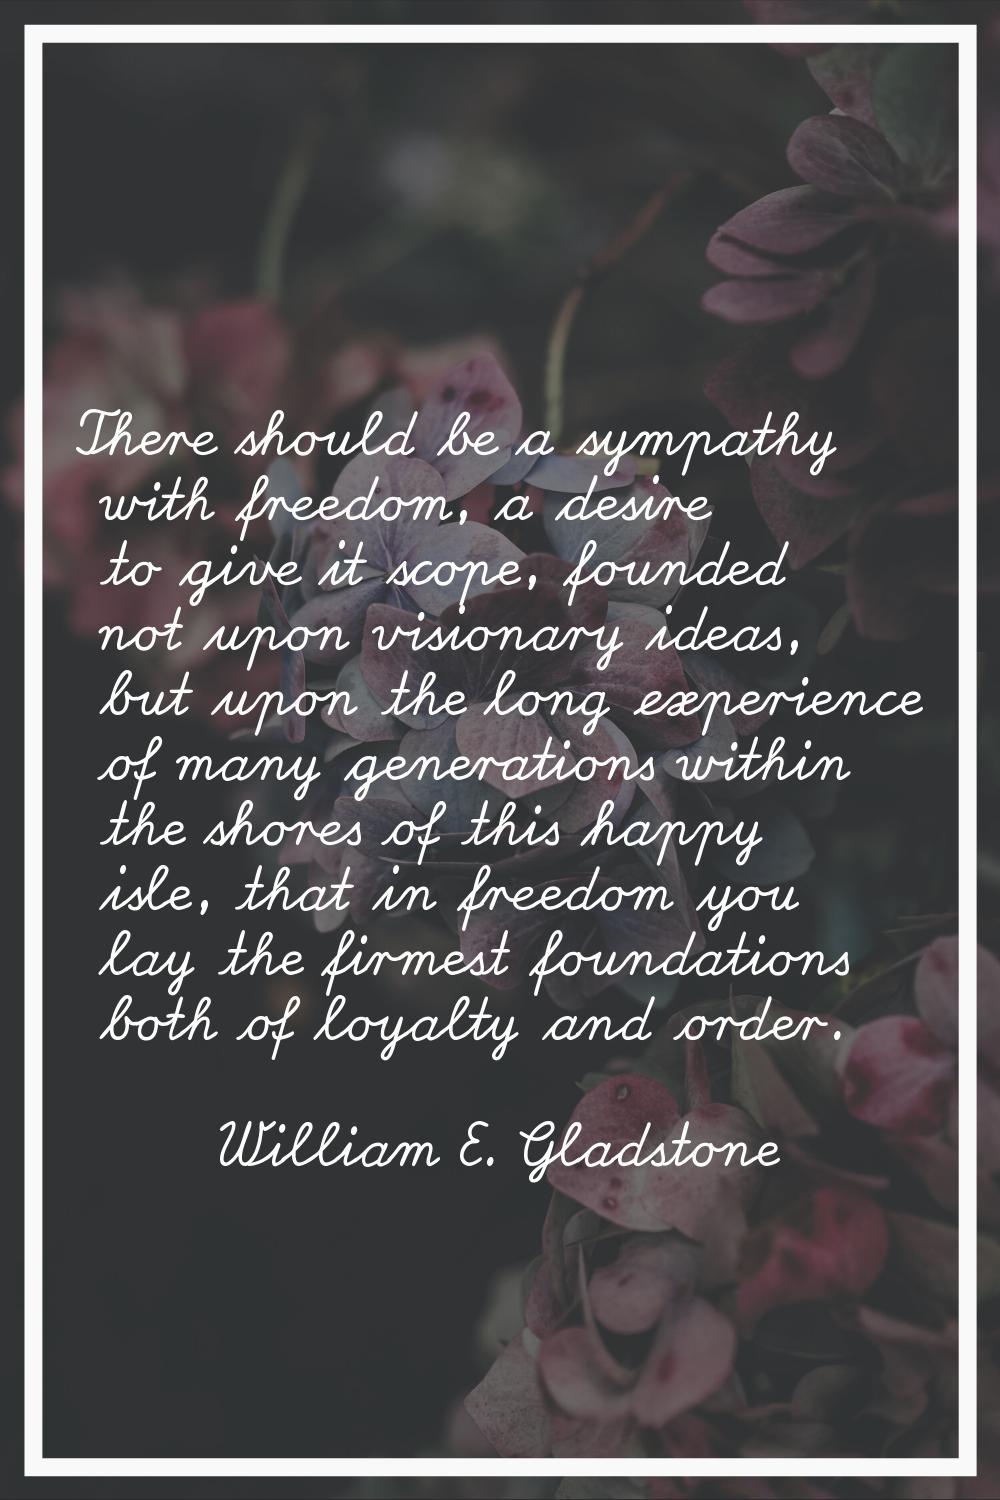 There should be a sympathy with freedom, a desire to give it scope, founded not upon visionary idea